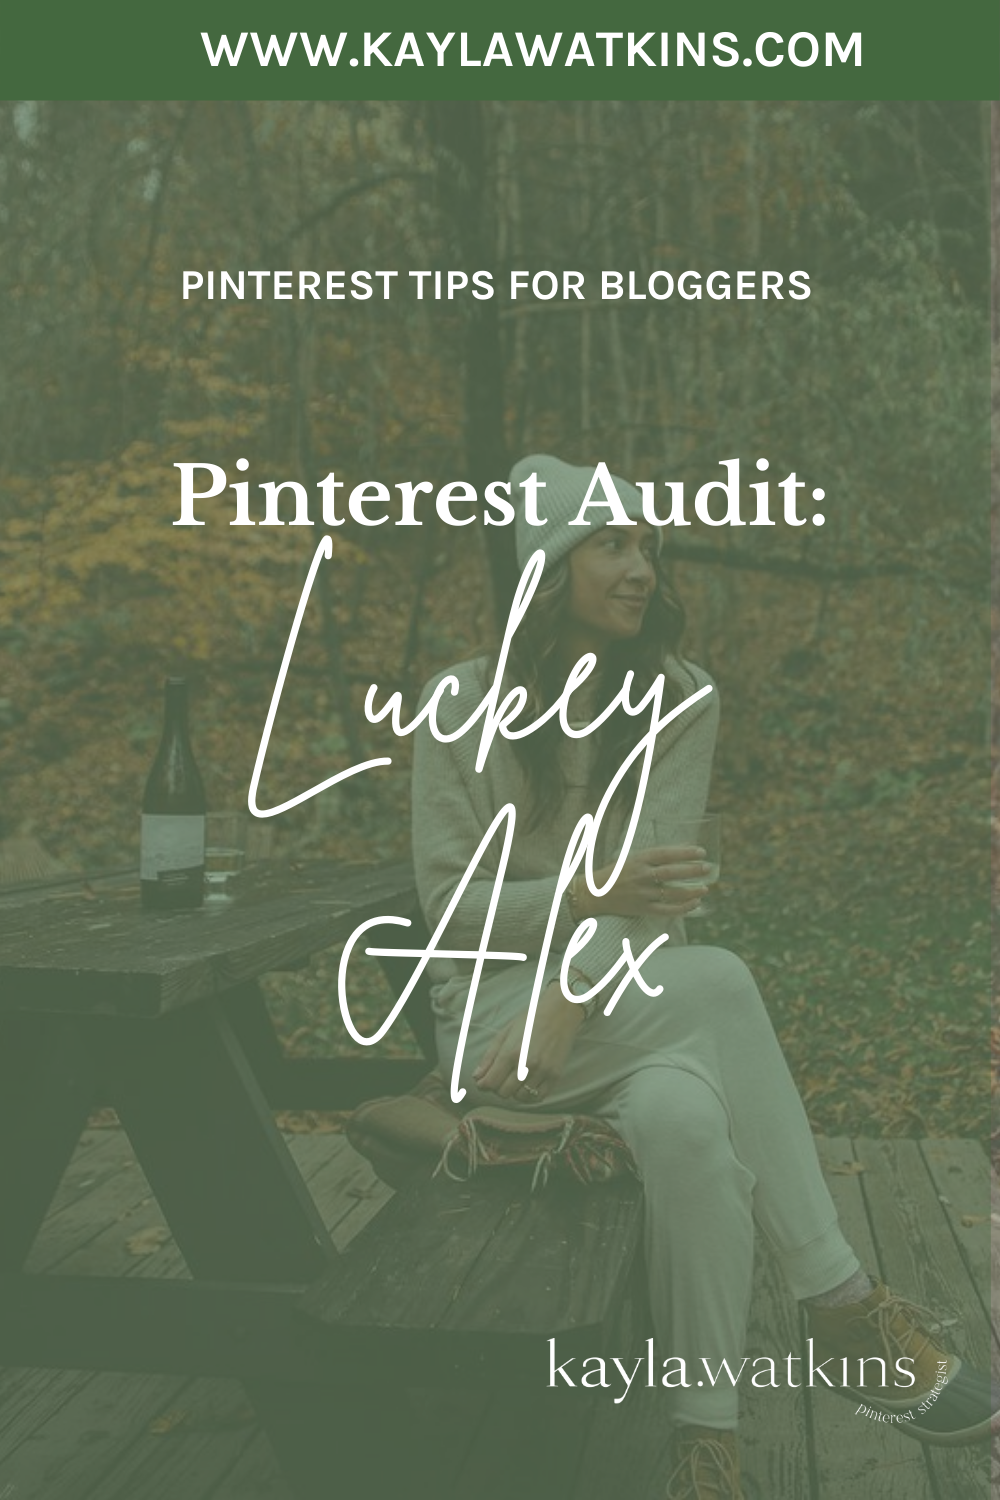 Pinterest Audit for a lifestyle client completed by Pinterest Expert, Kayla Watkins.